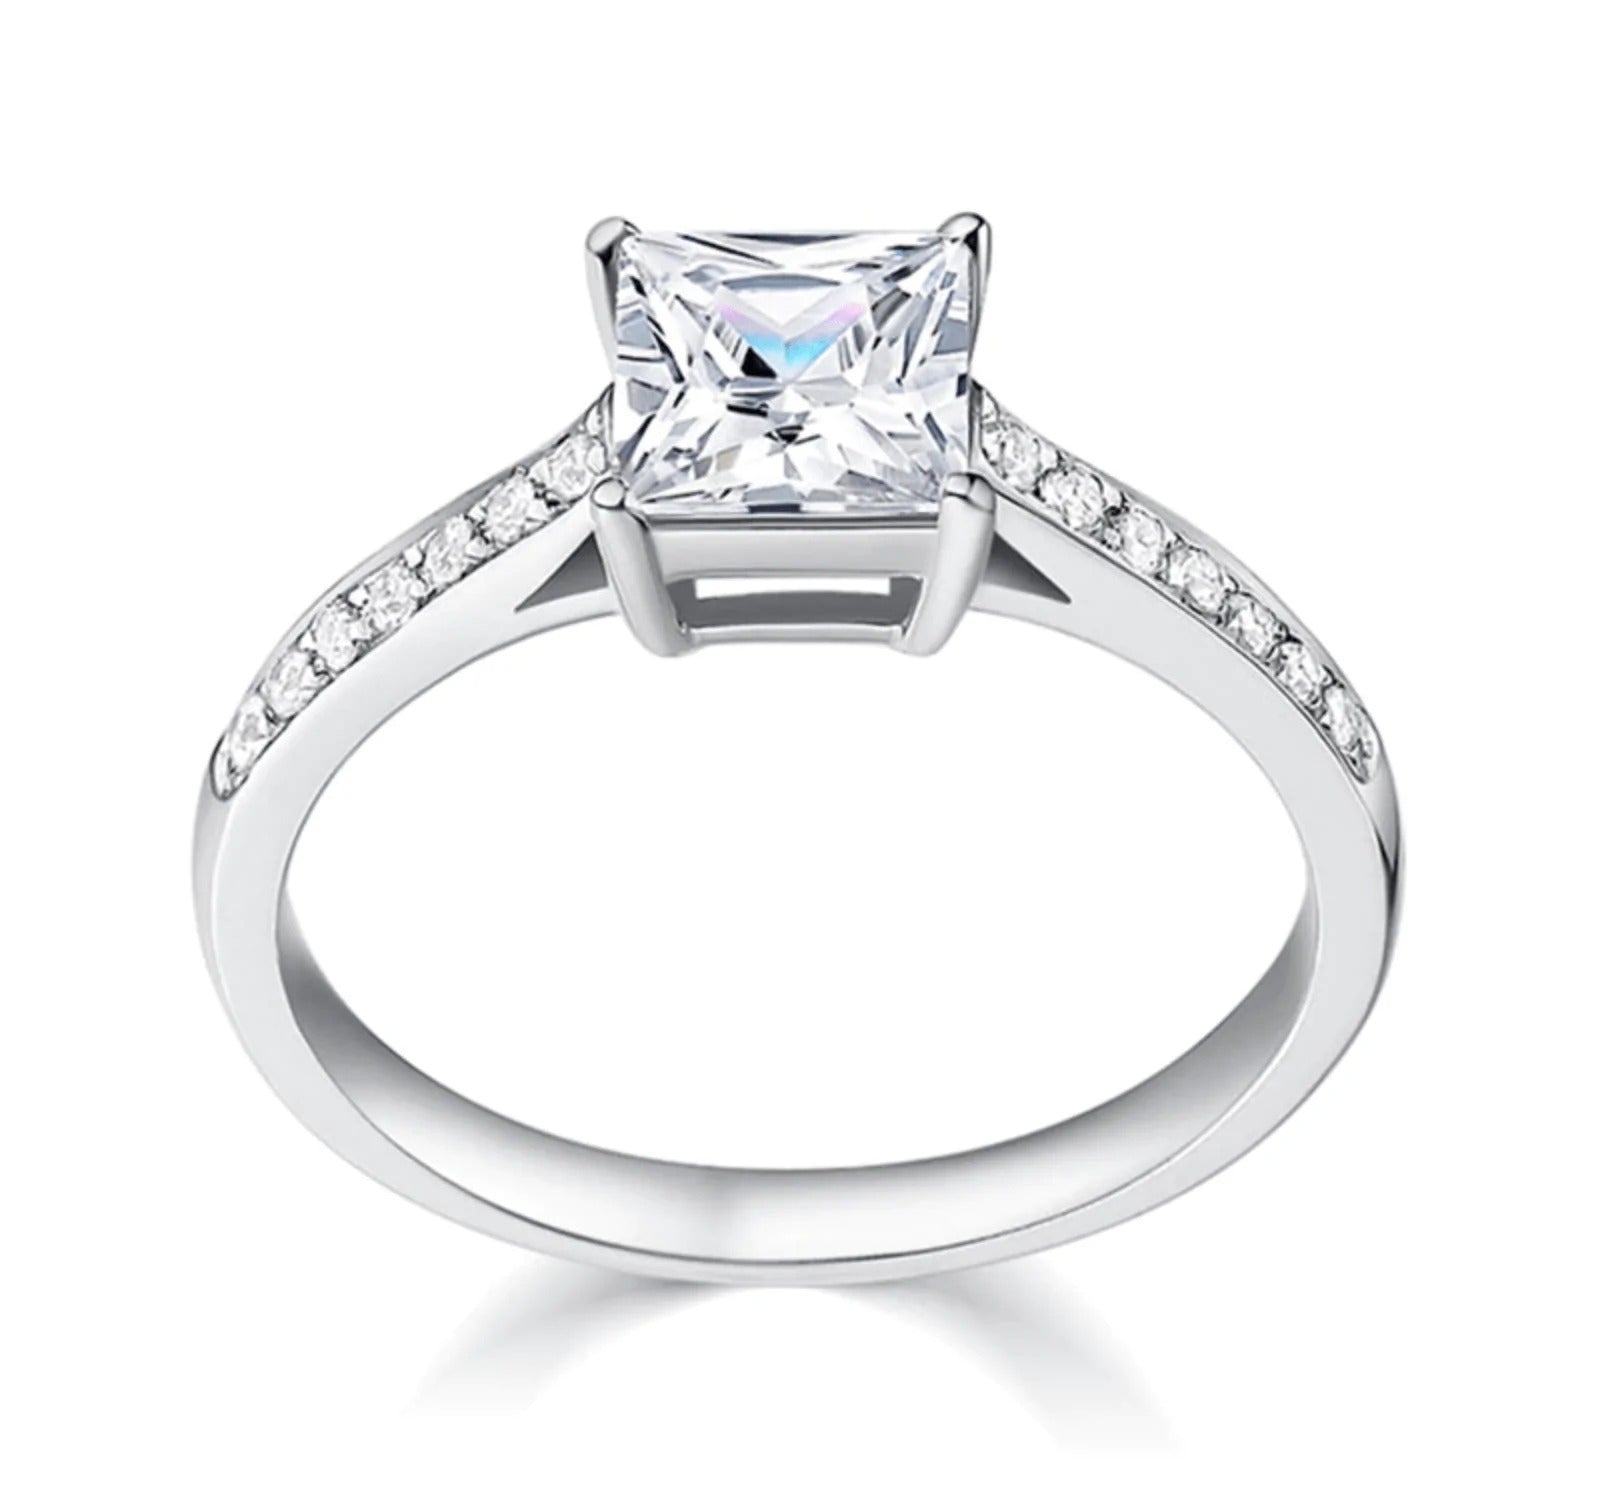 The Caliope Princess Cut Ring